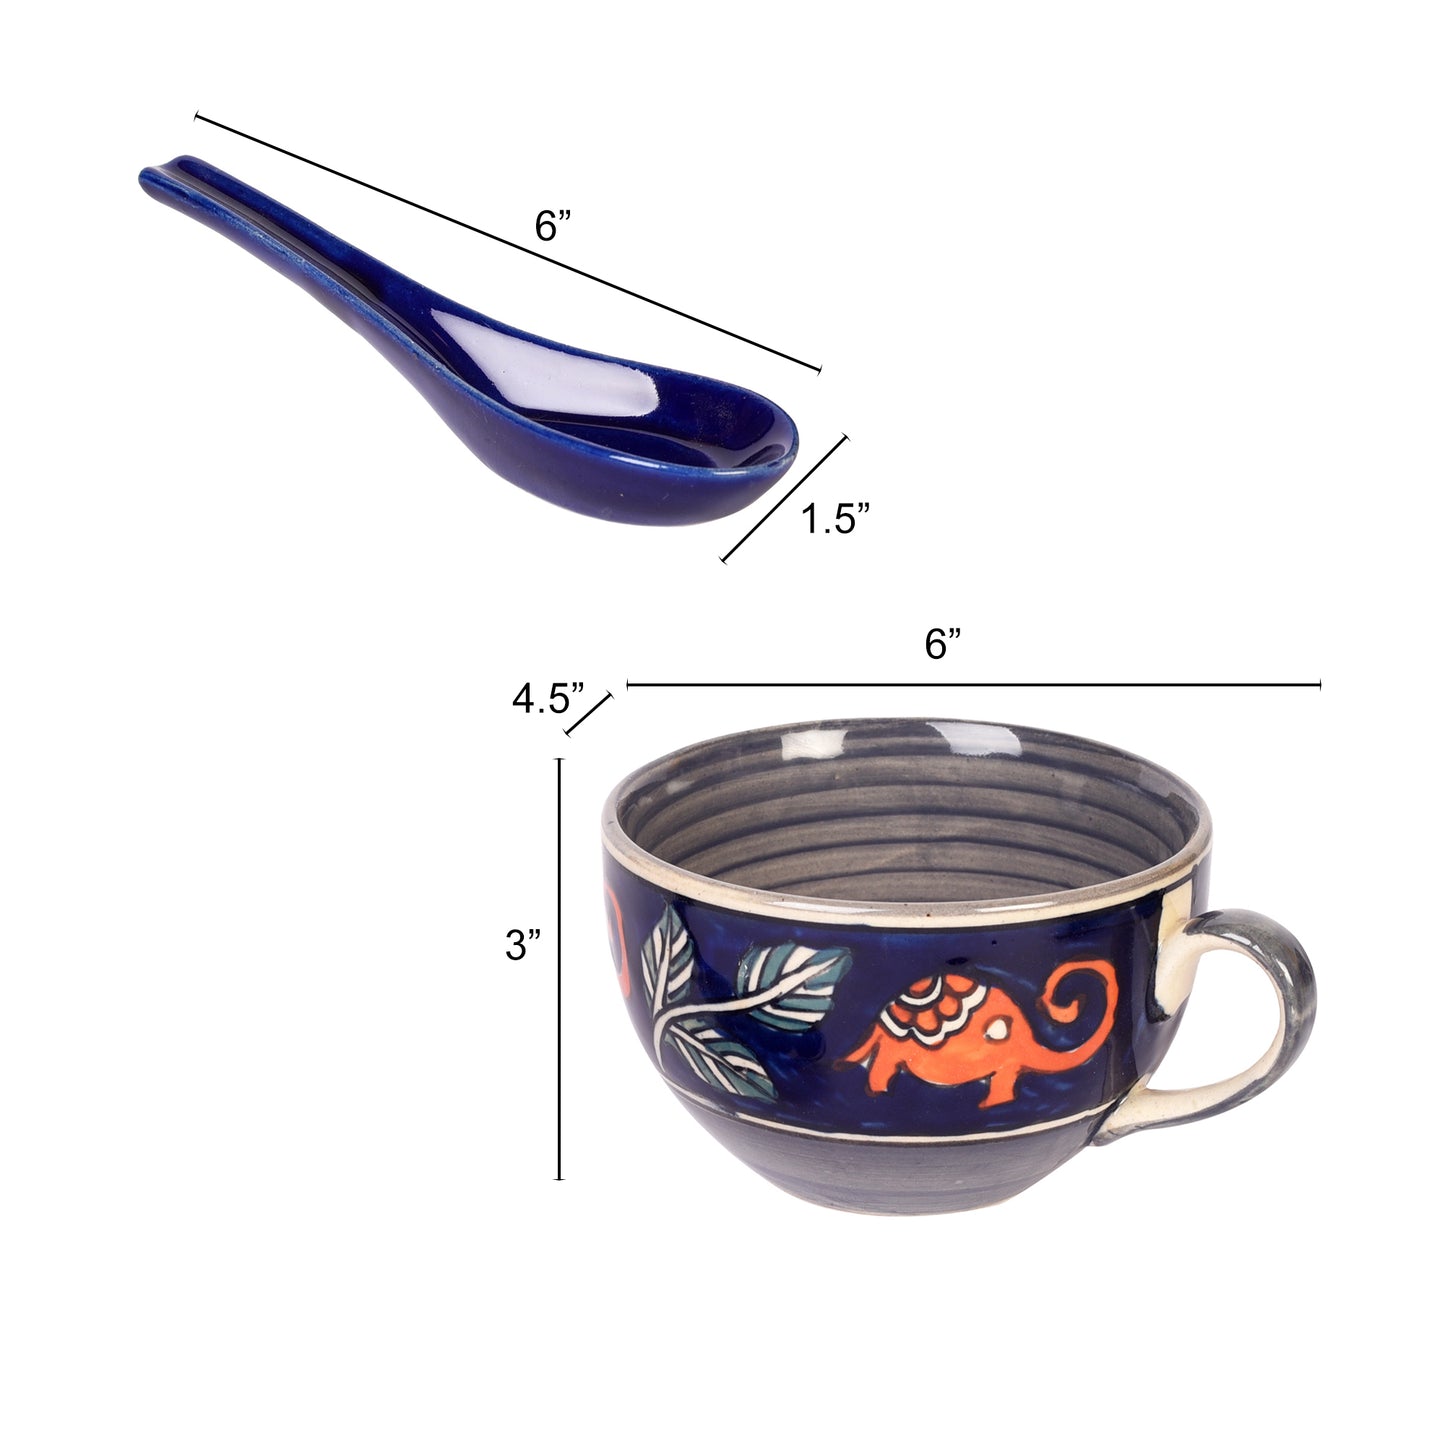 Morning Tuskers Soup Bowls S04 w/spoons